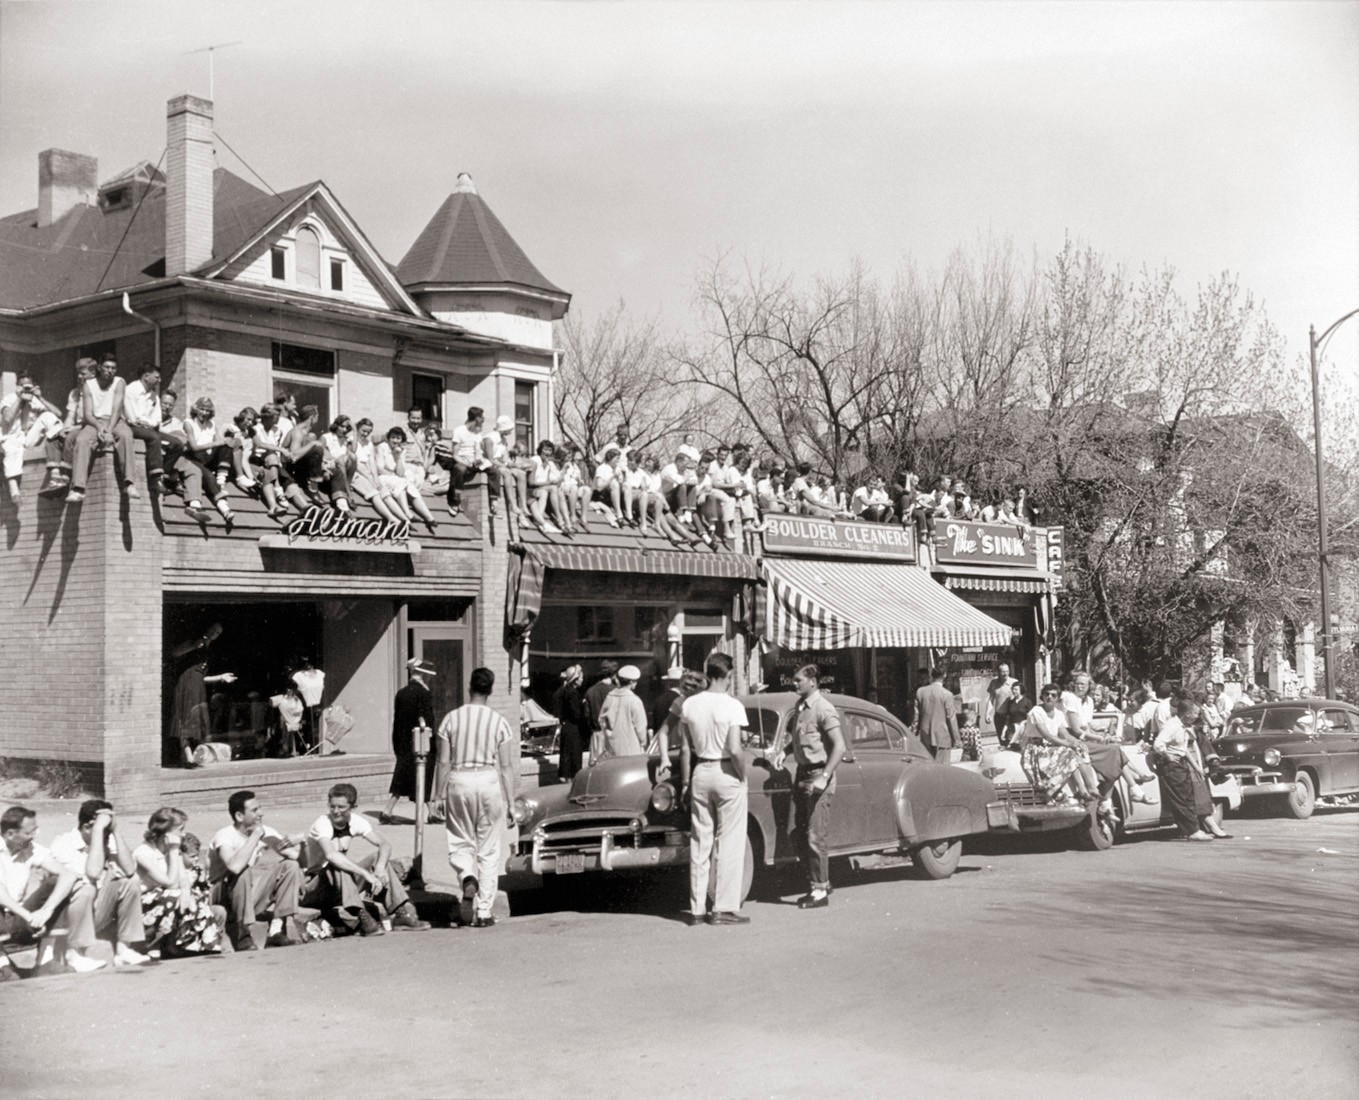 Black and white photo from the 1950s. Lines of collage aged students and locals lining 13th street on the hill. People are on the streets and on the roofs of The Sink and neighboring stores.